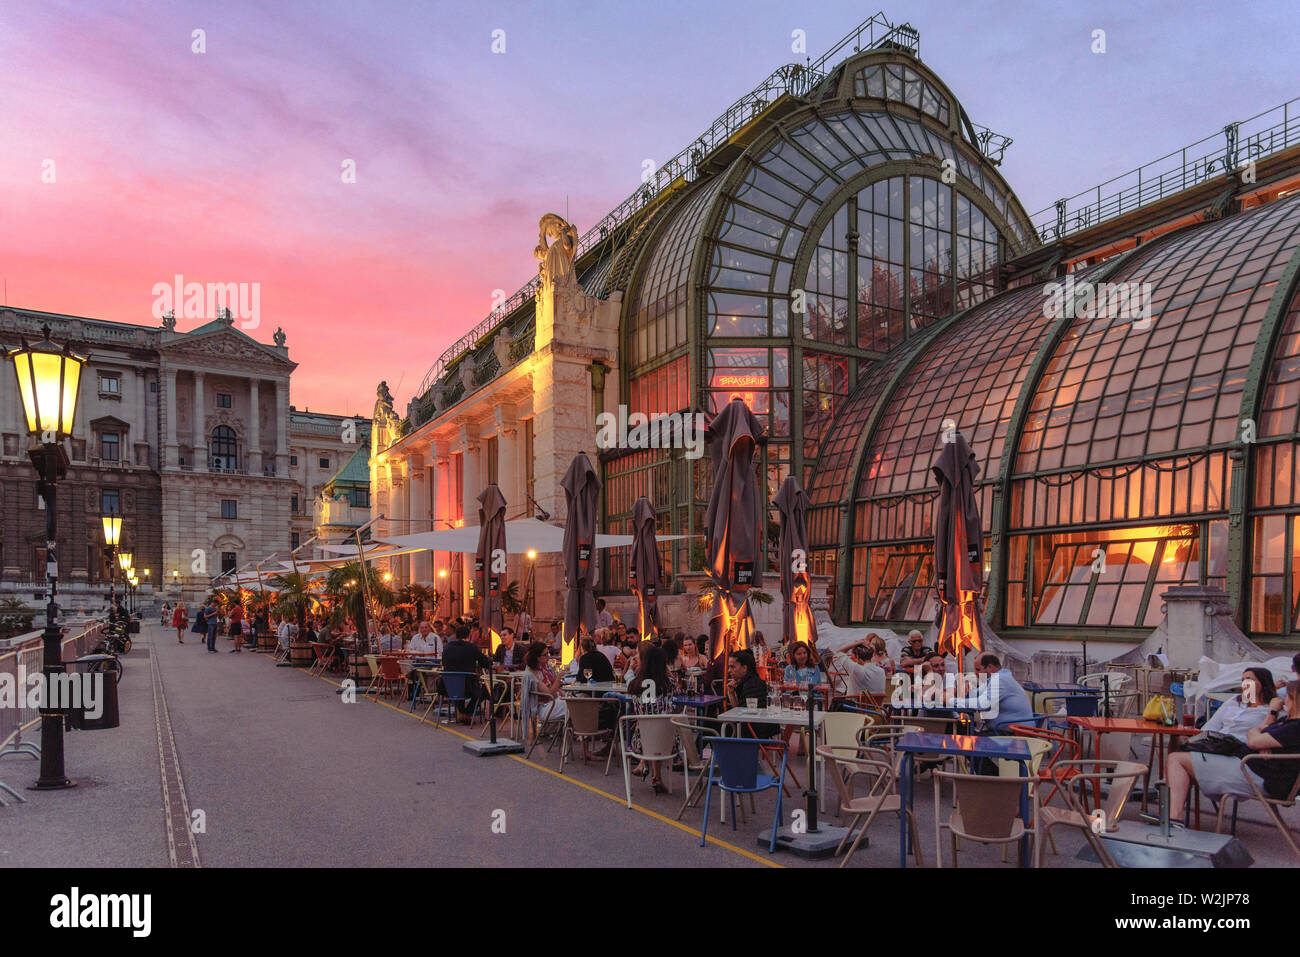 The art nouveau Schmetterlinghaus and Palmenhaus in Vienna, Austria at dusk with a beautiful sky Stock Photo